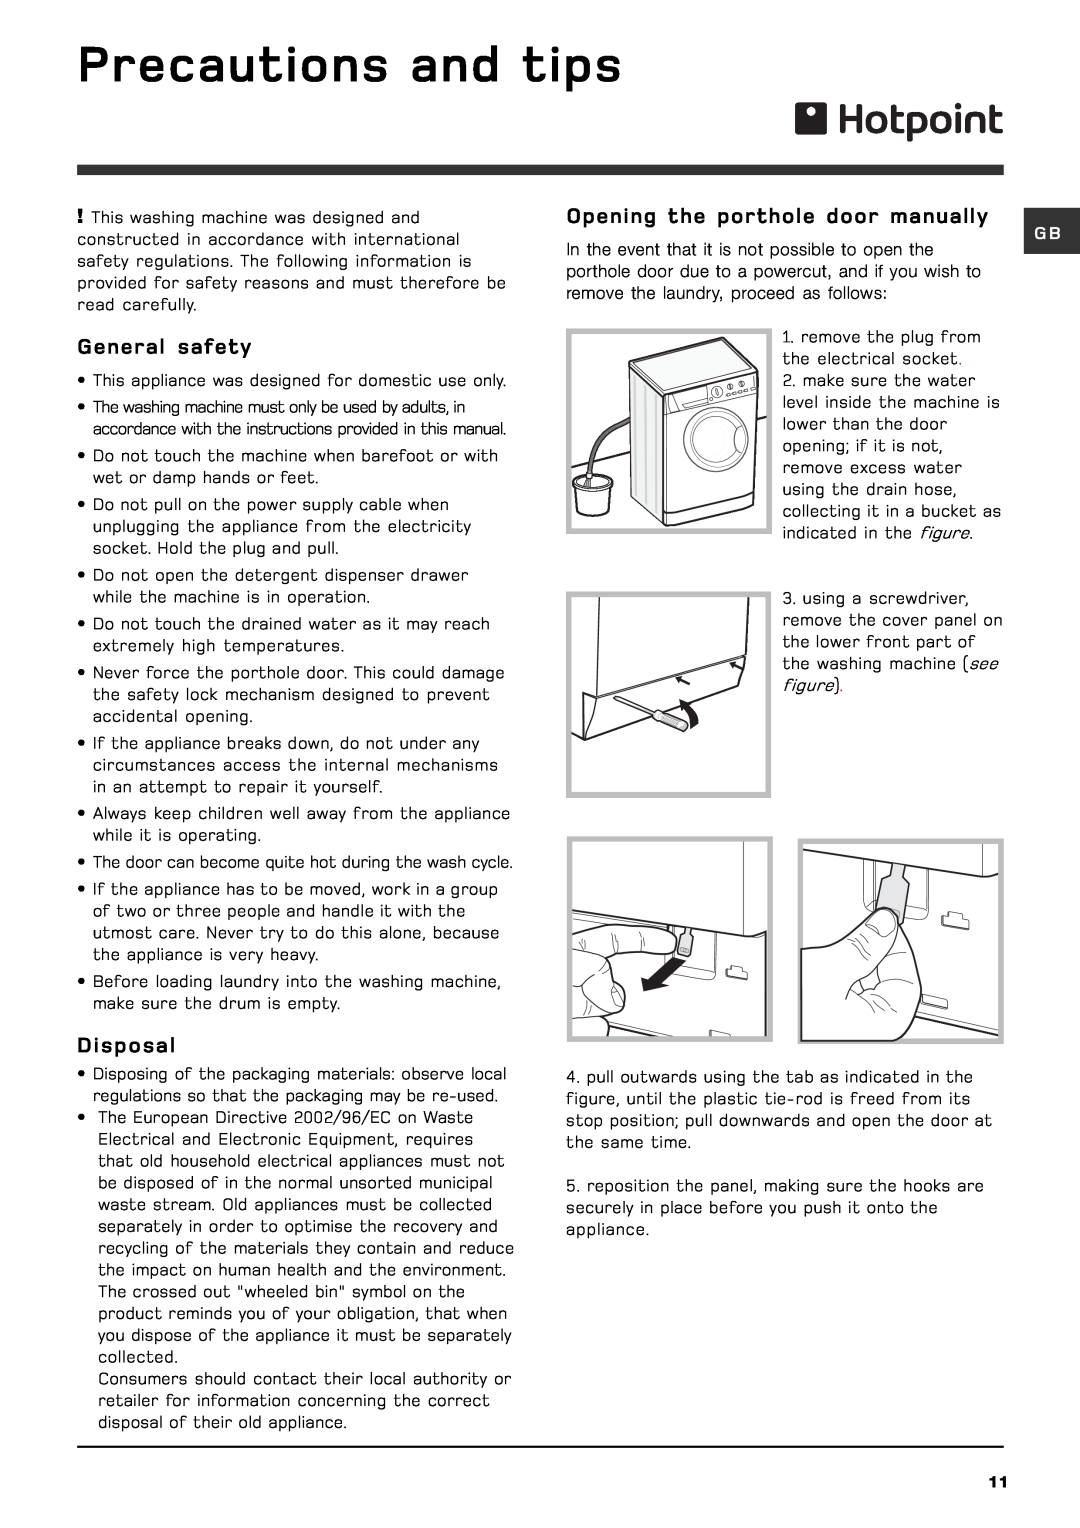 Hotpoint wml 520 Precautions and tips, General safety, Disposal, Opening the porthole door manually 